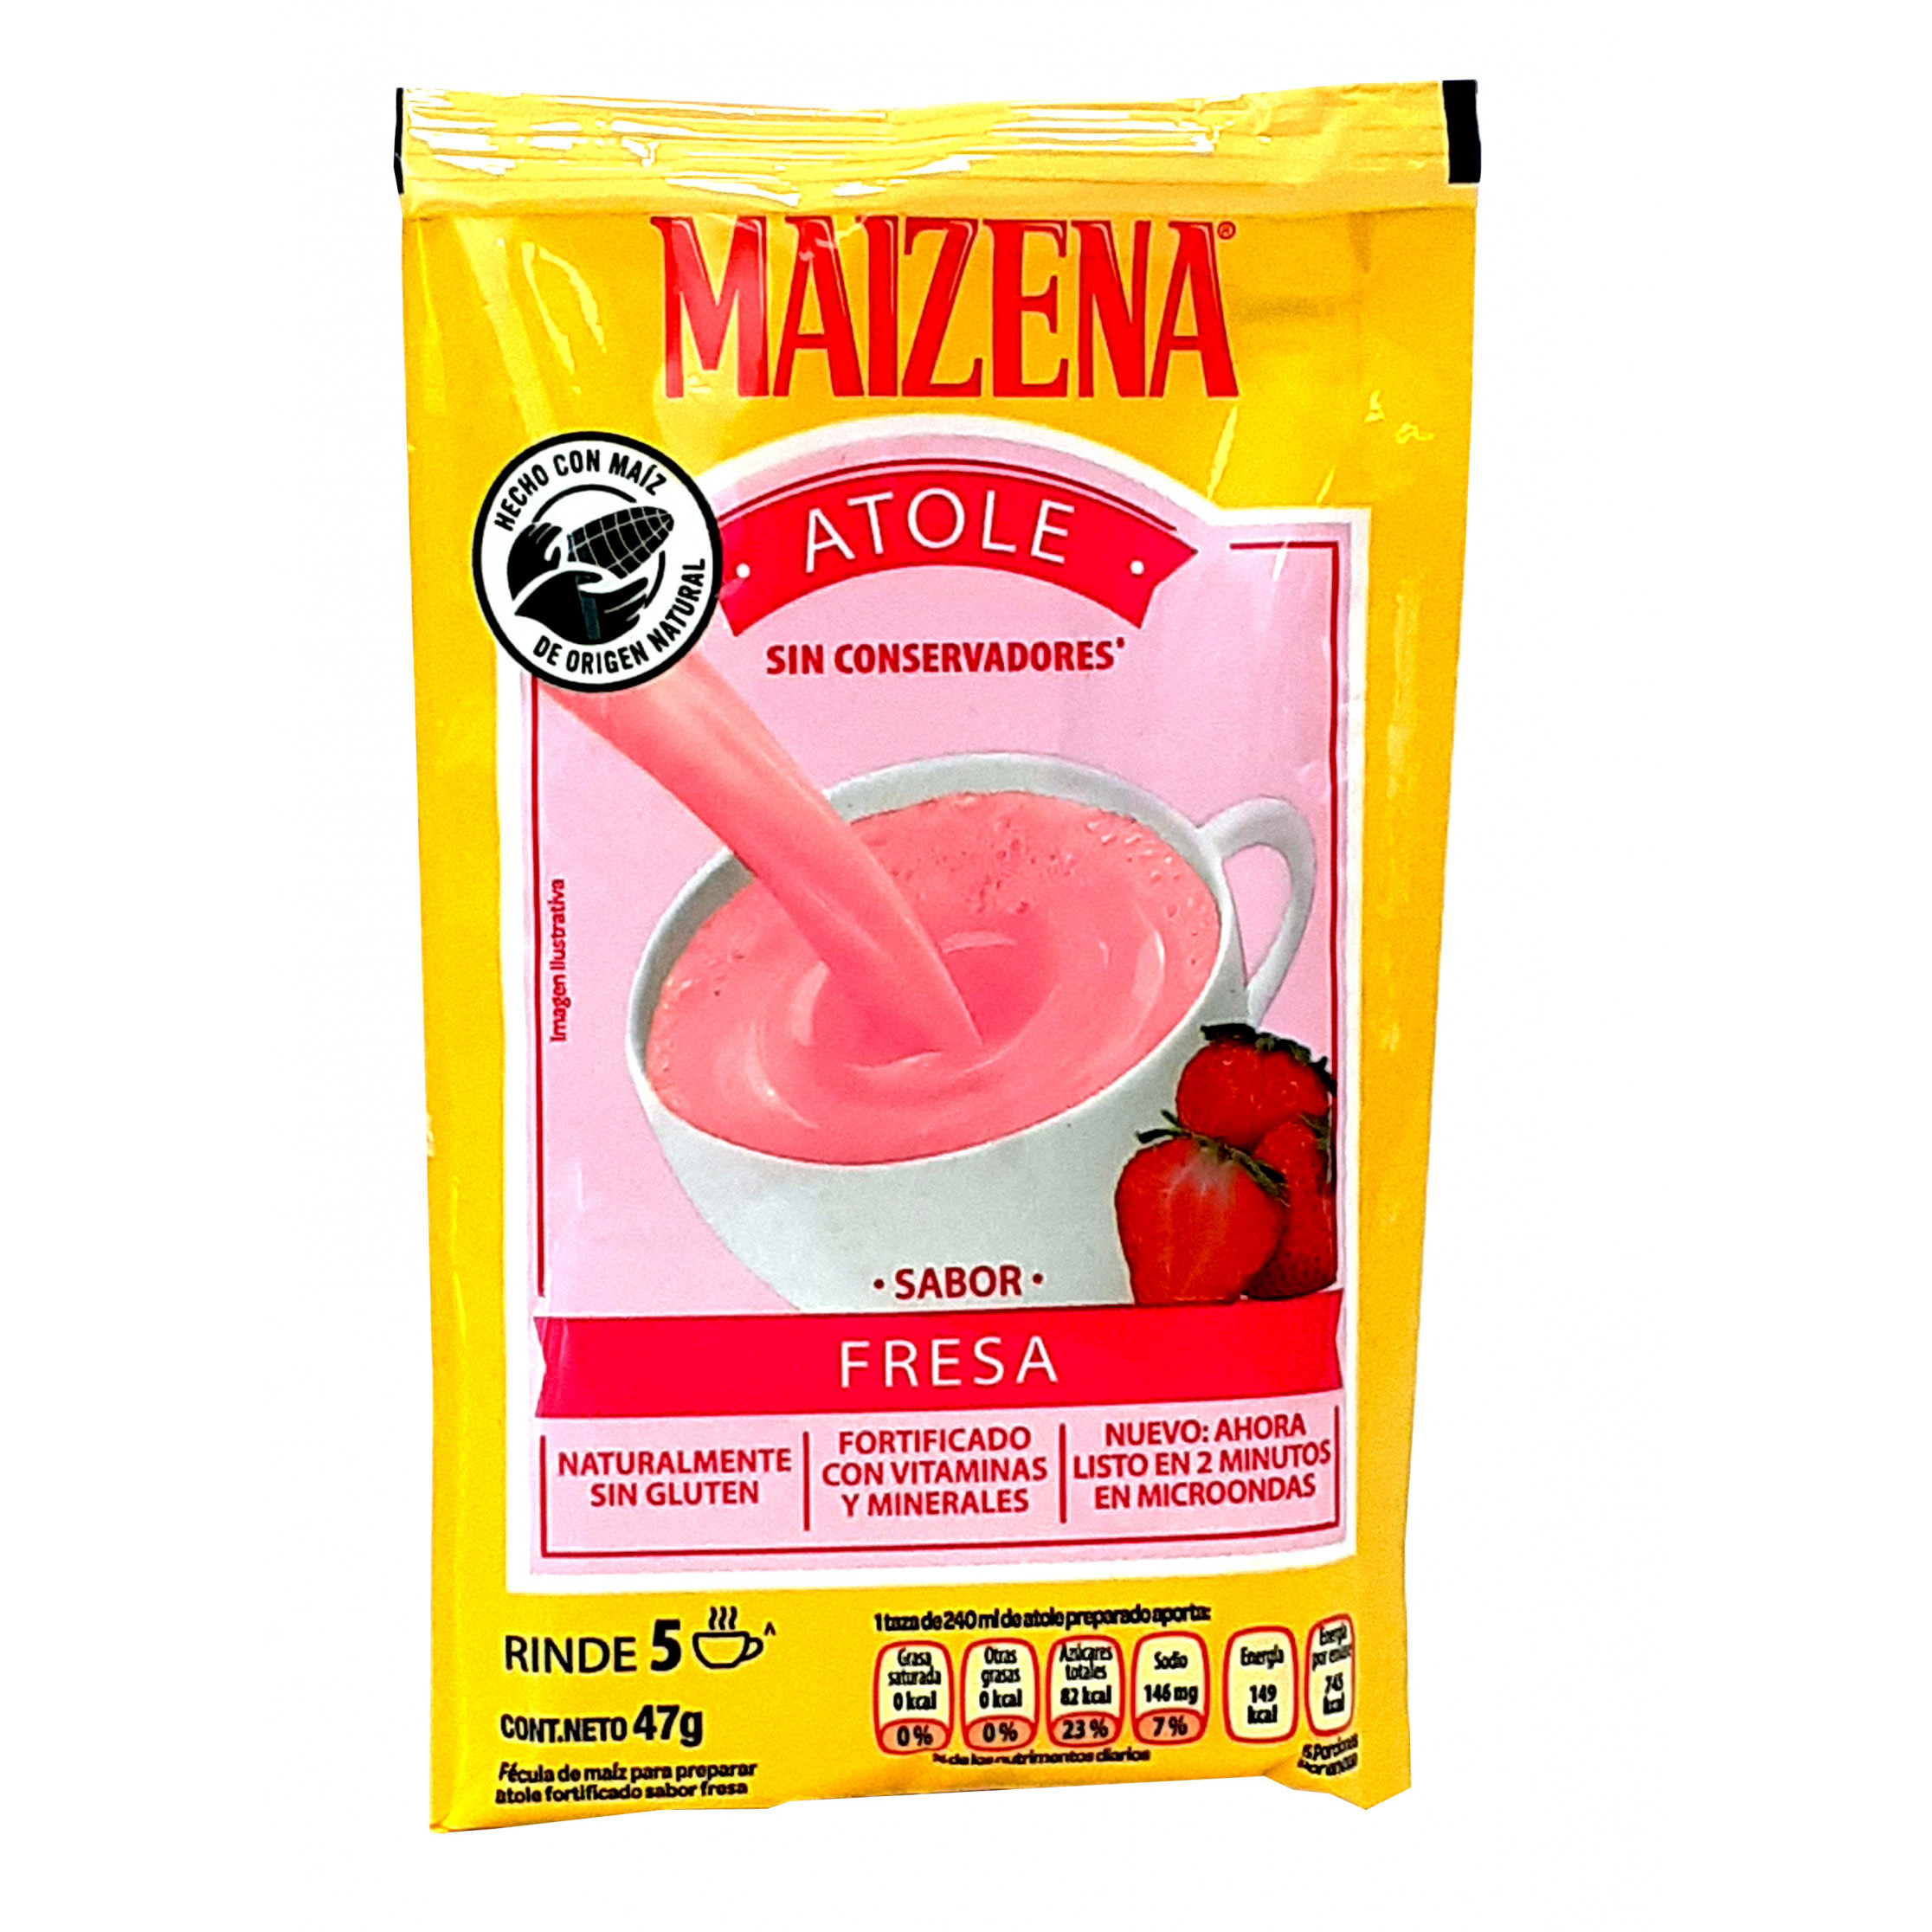 Maizena Strawberry 47g | Buy now at Mexgrocer.co.uk